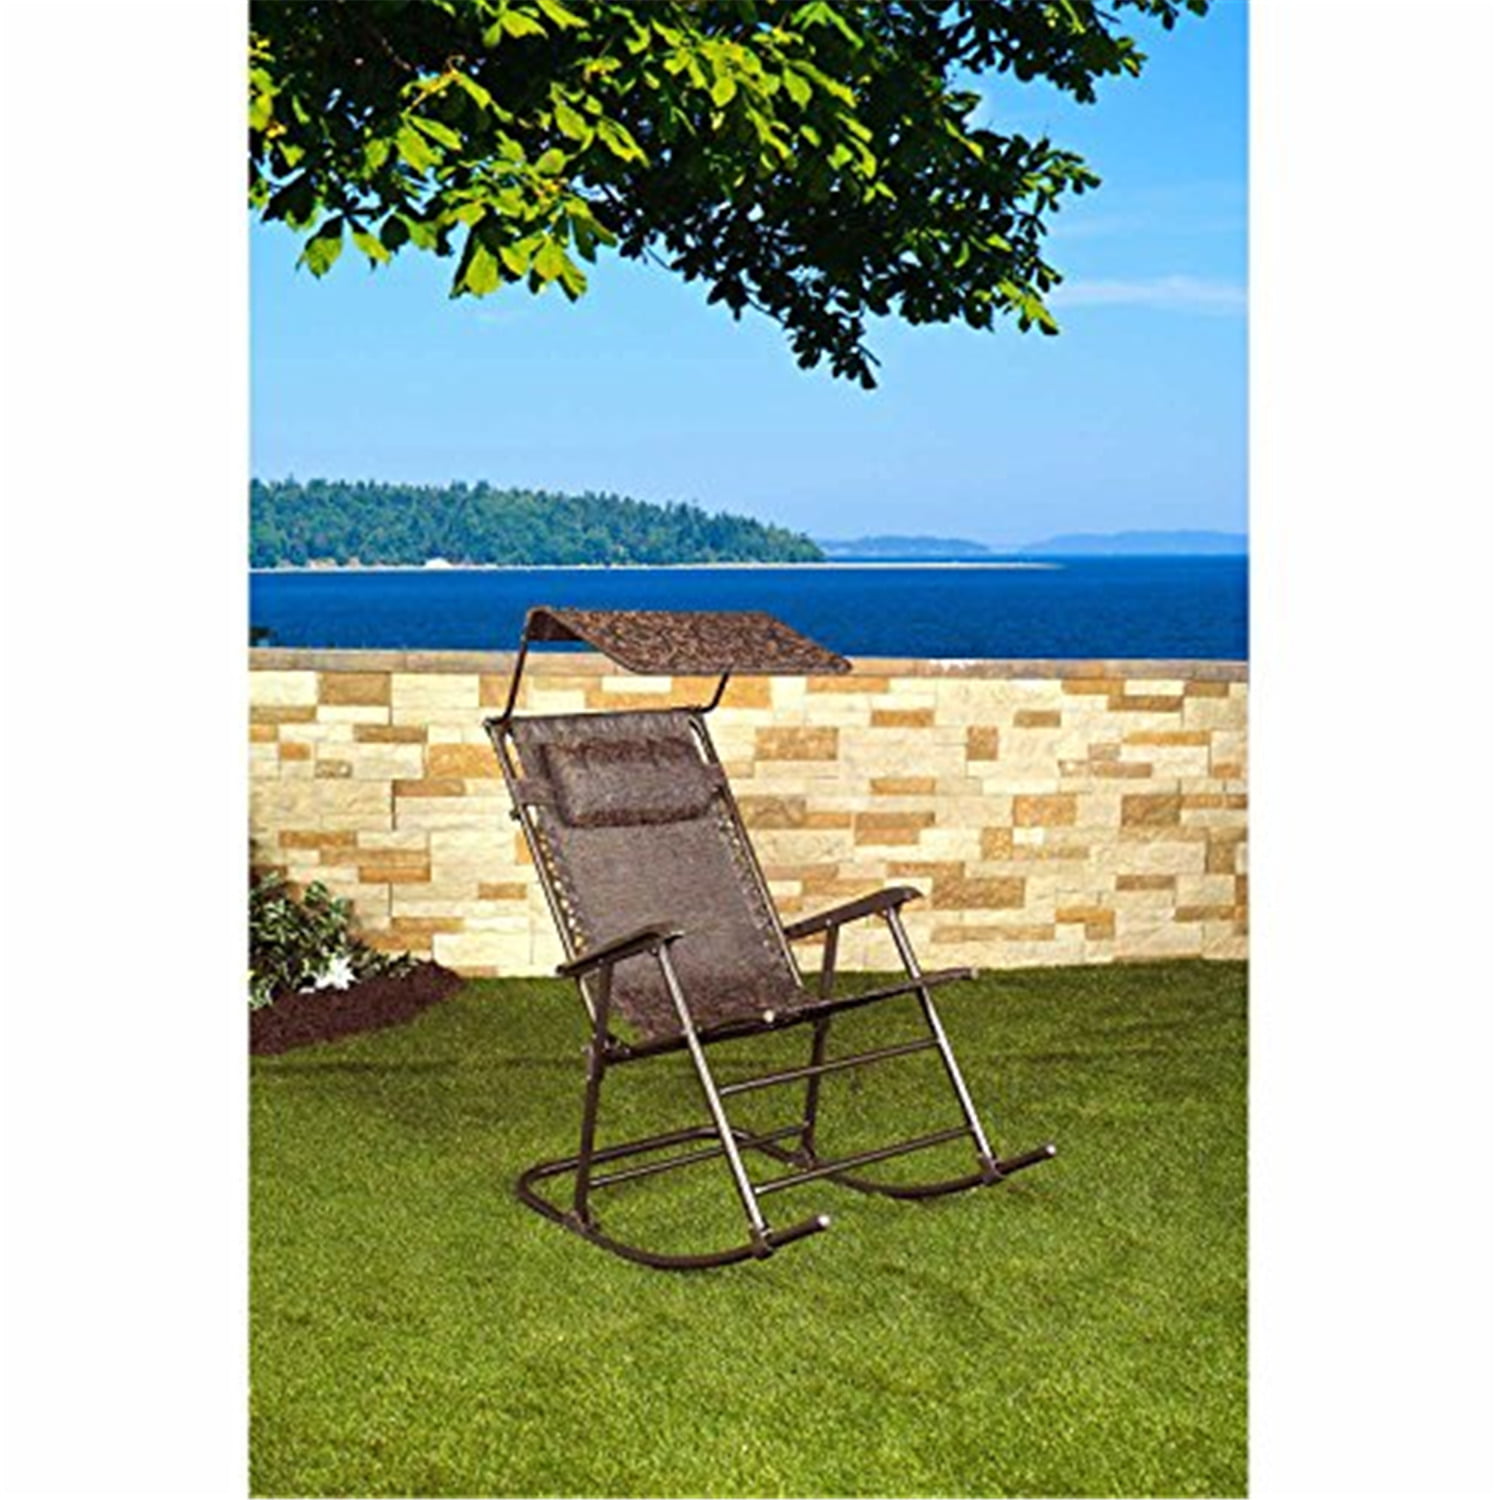 Deluxe Rocking Chair With Canopy, Fold Up Rocking Chair With Canopy